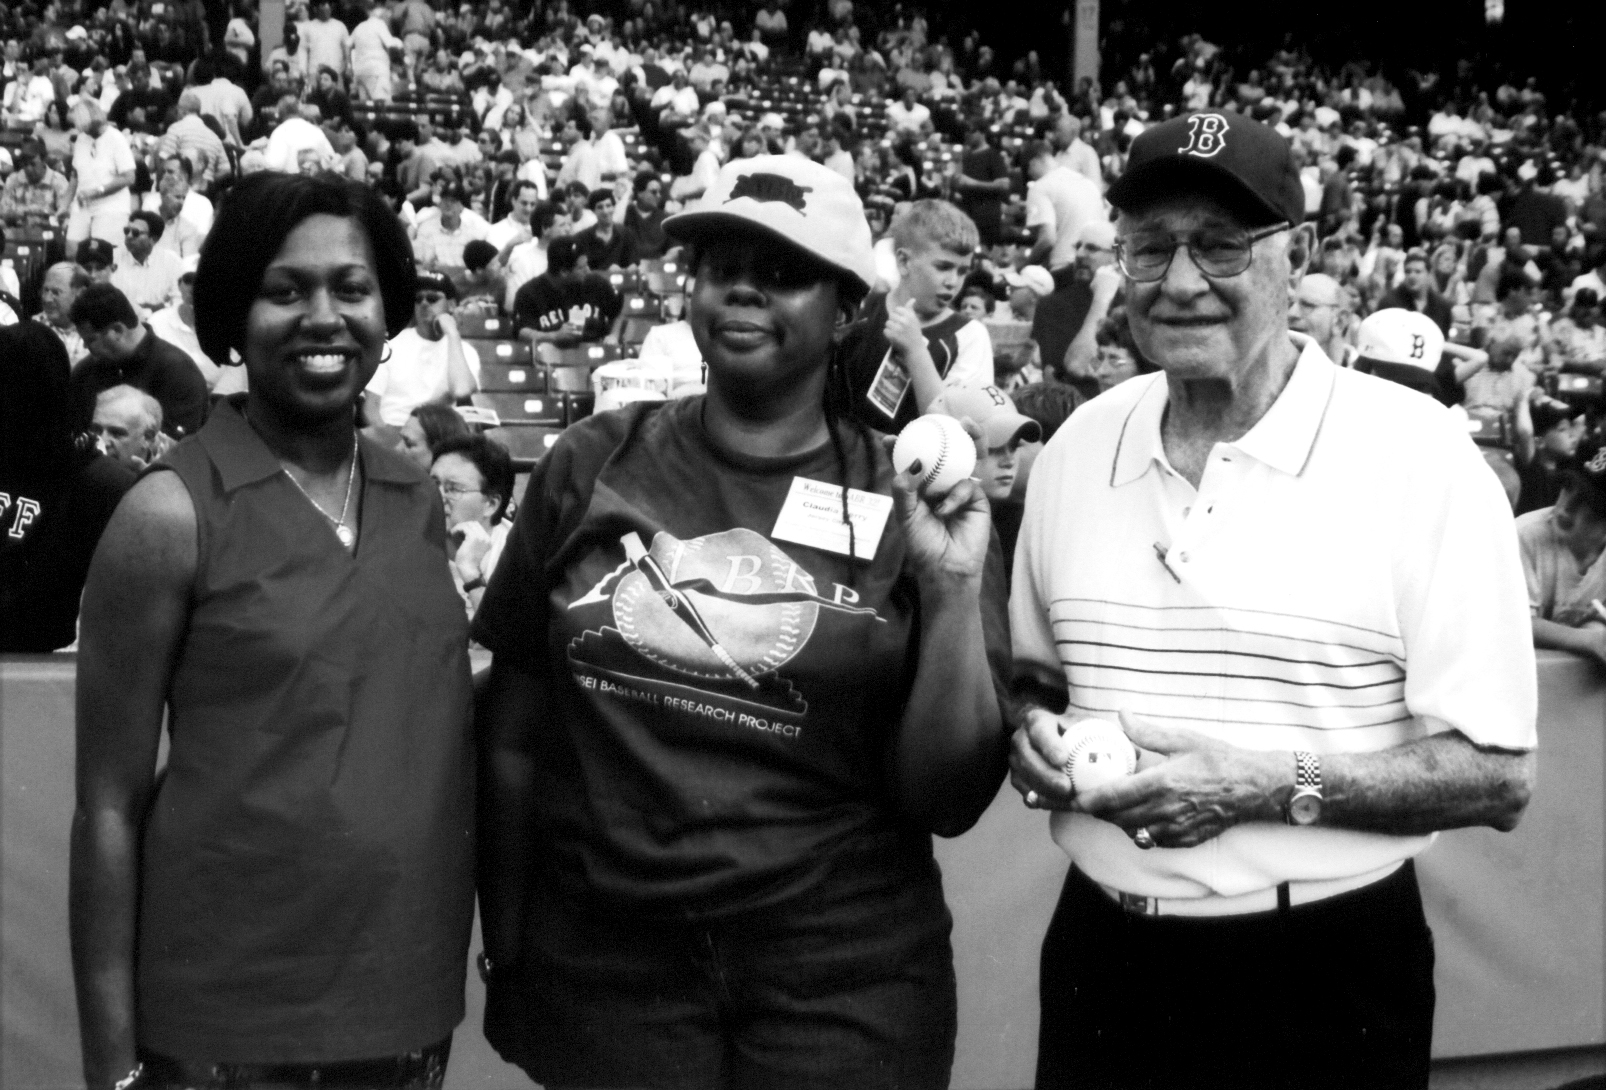 SABR Board President Claudia Perry, center, prepares to throw out the ceremonial first pitch at Fenway Park on June 28, 2002. At left is Boston Red Sox executive Marcita Thompson and at right is former Boston Braves player Sibby Sisti. (Courtesy of Bill Nowlin)